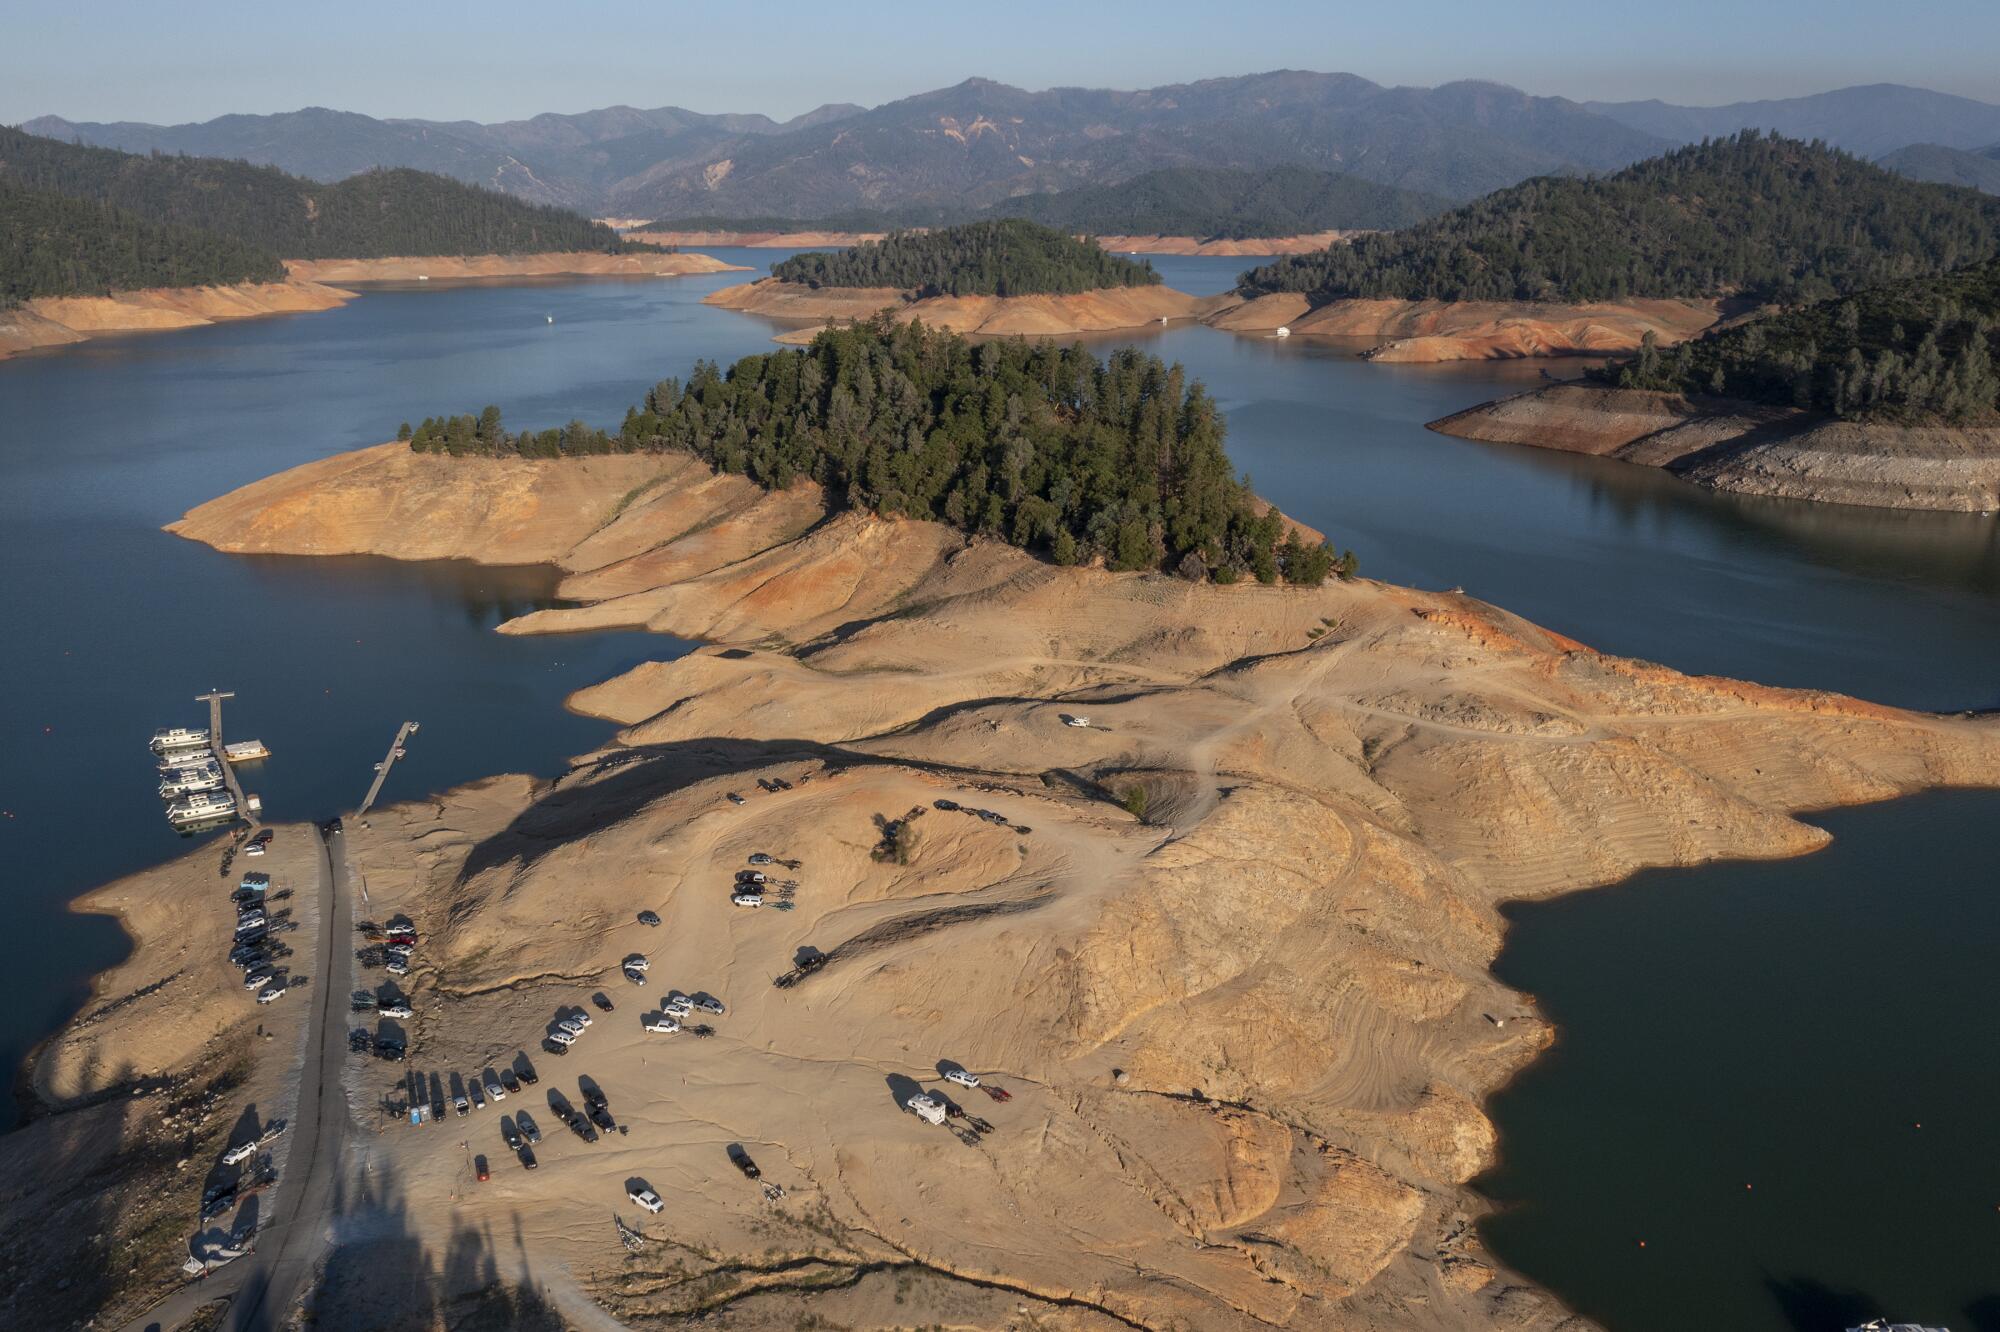 The receding shoreline at a boat ramp illustrates the worsening drought conditions on Lake Shasta.